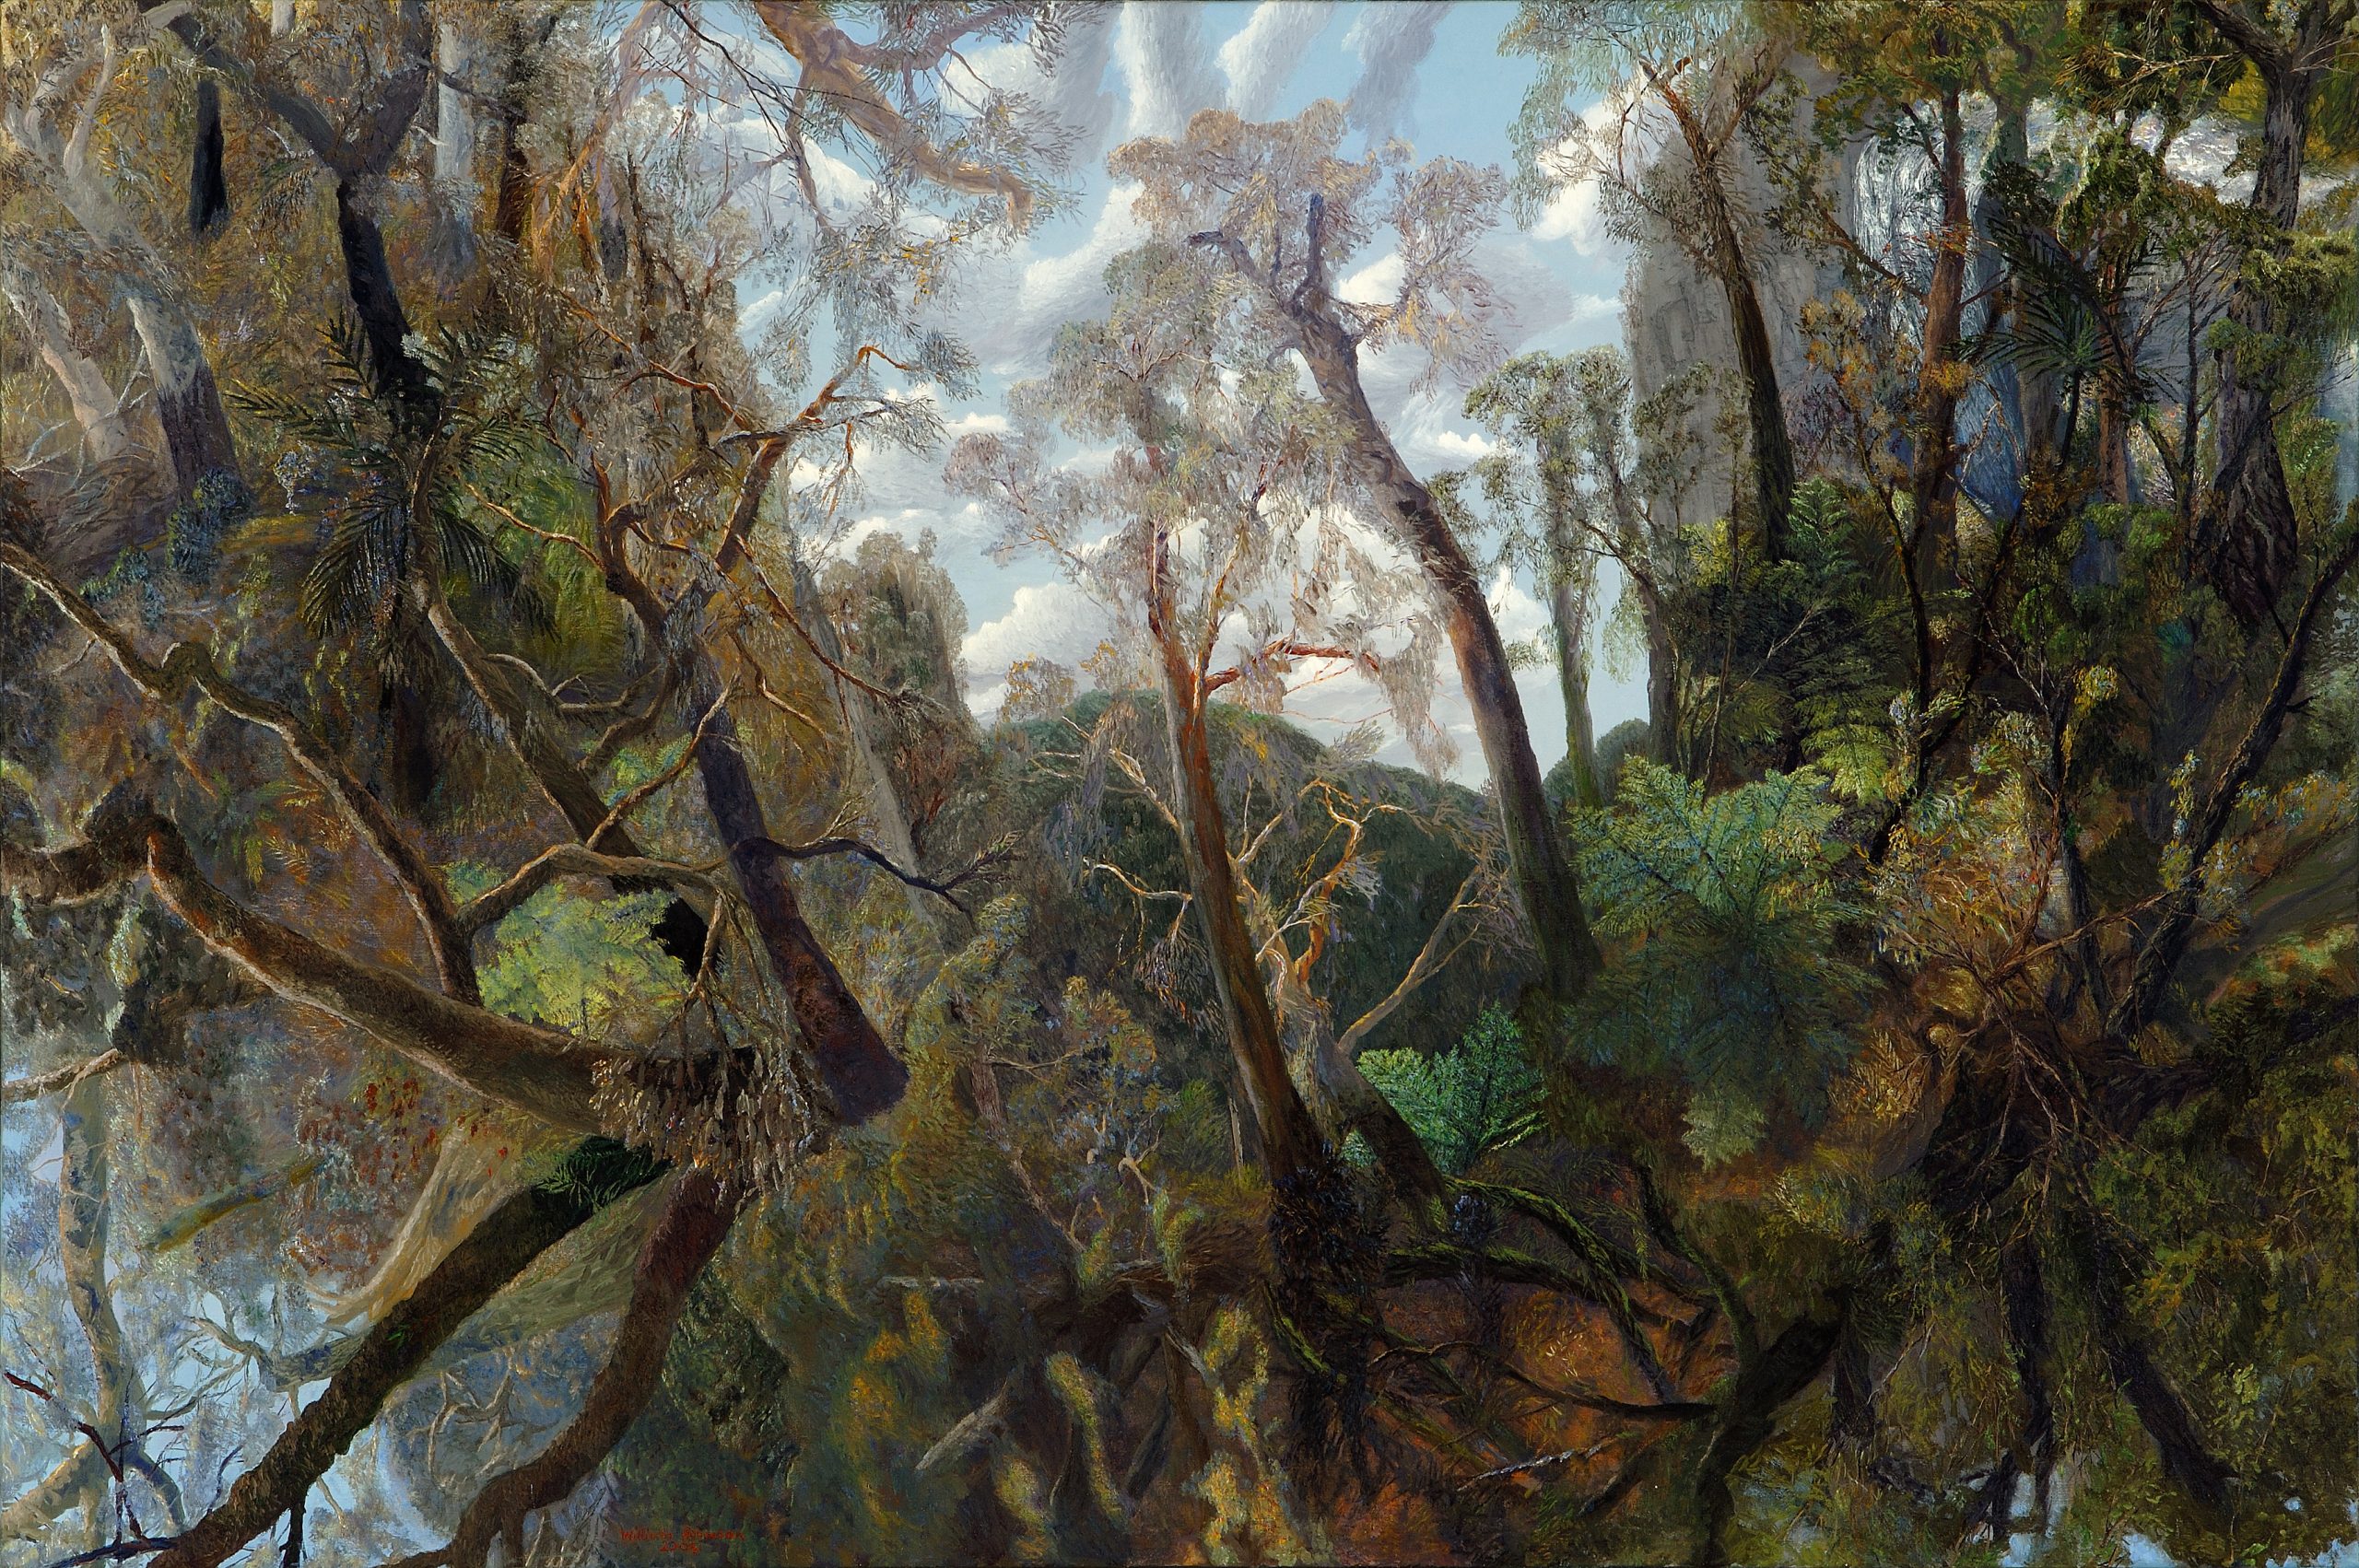 A painting of trees with with blue skies and slightly distorted perspectives